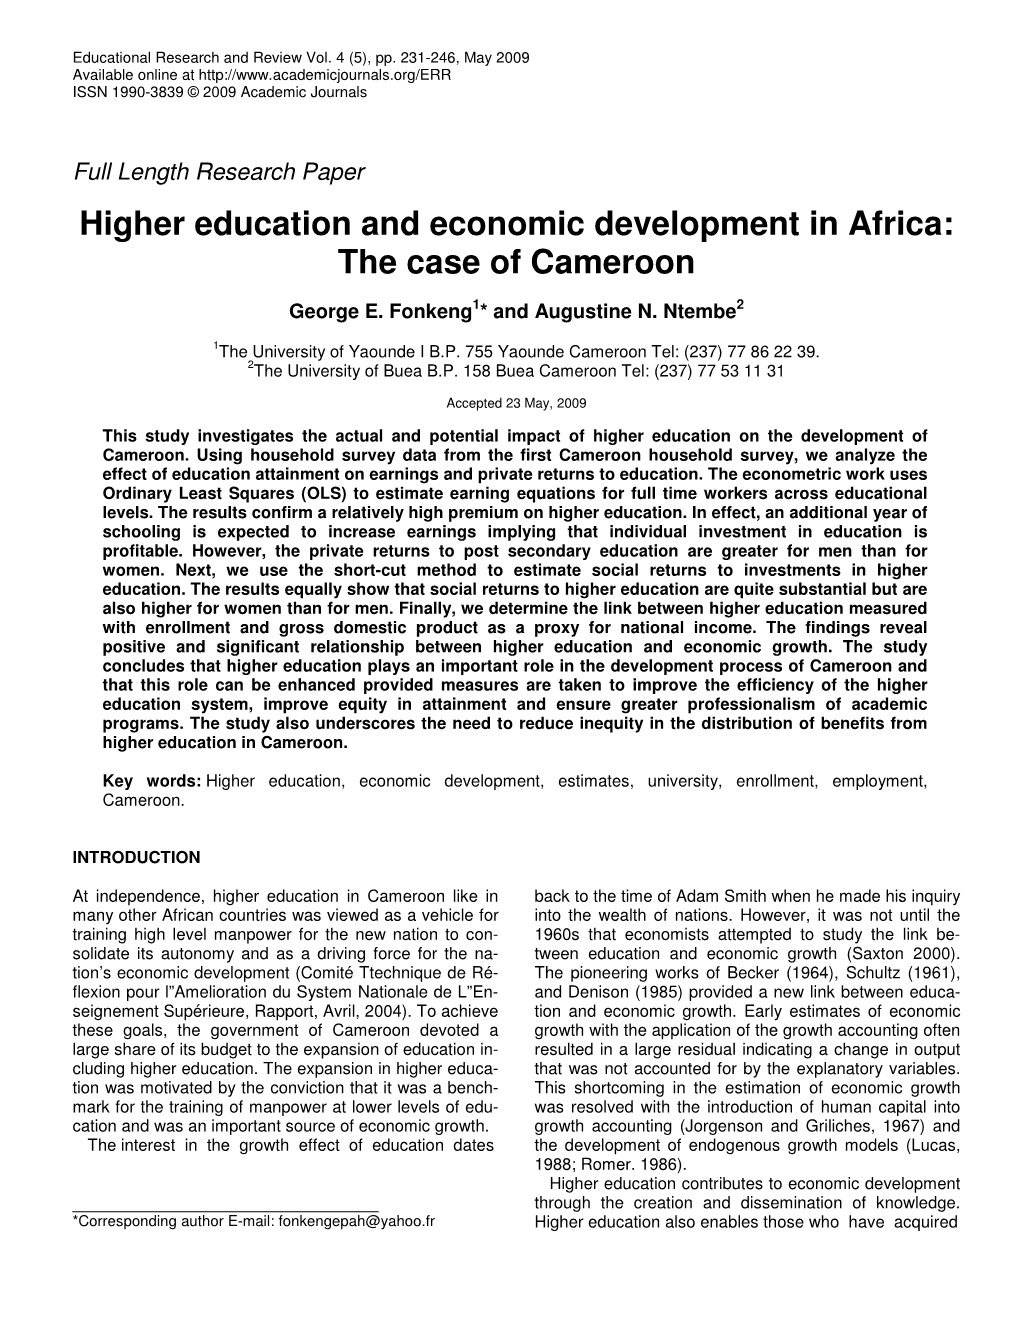 Higher Education and Economic Development in Africa: the Case of Cameroon